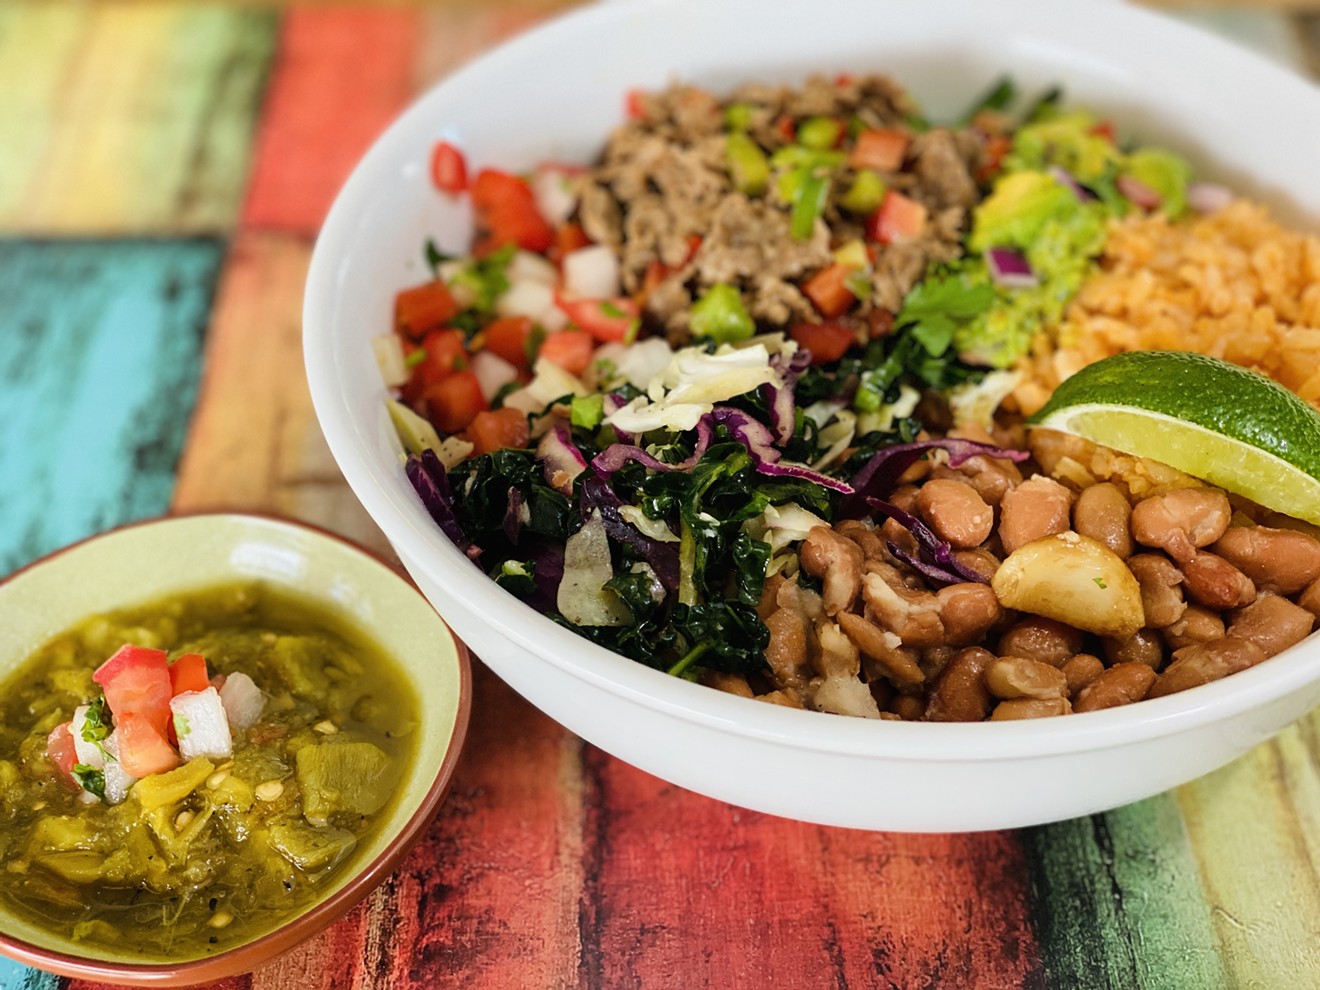 Pita Jungle's new virtual kitchen is a wood-fire Mexican grill with a healthy-leaning menu.